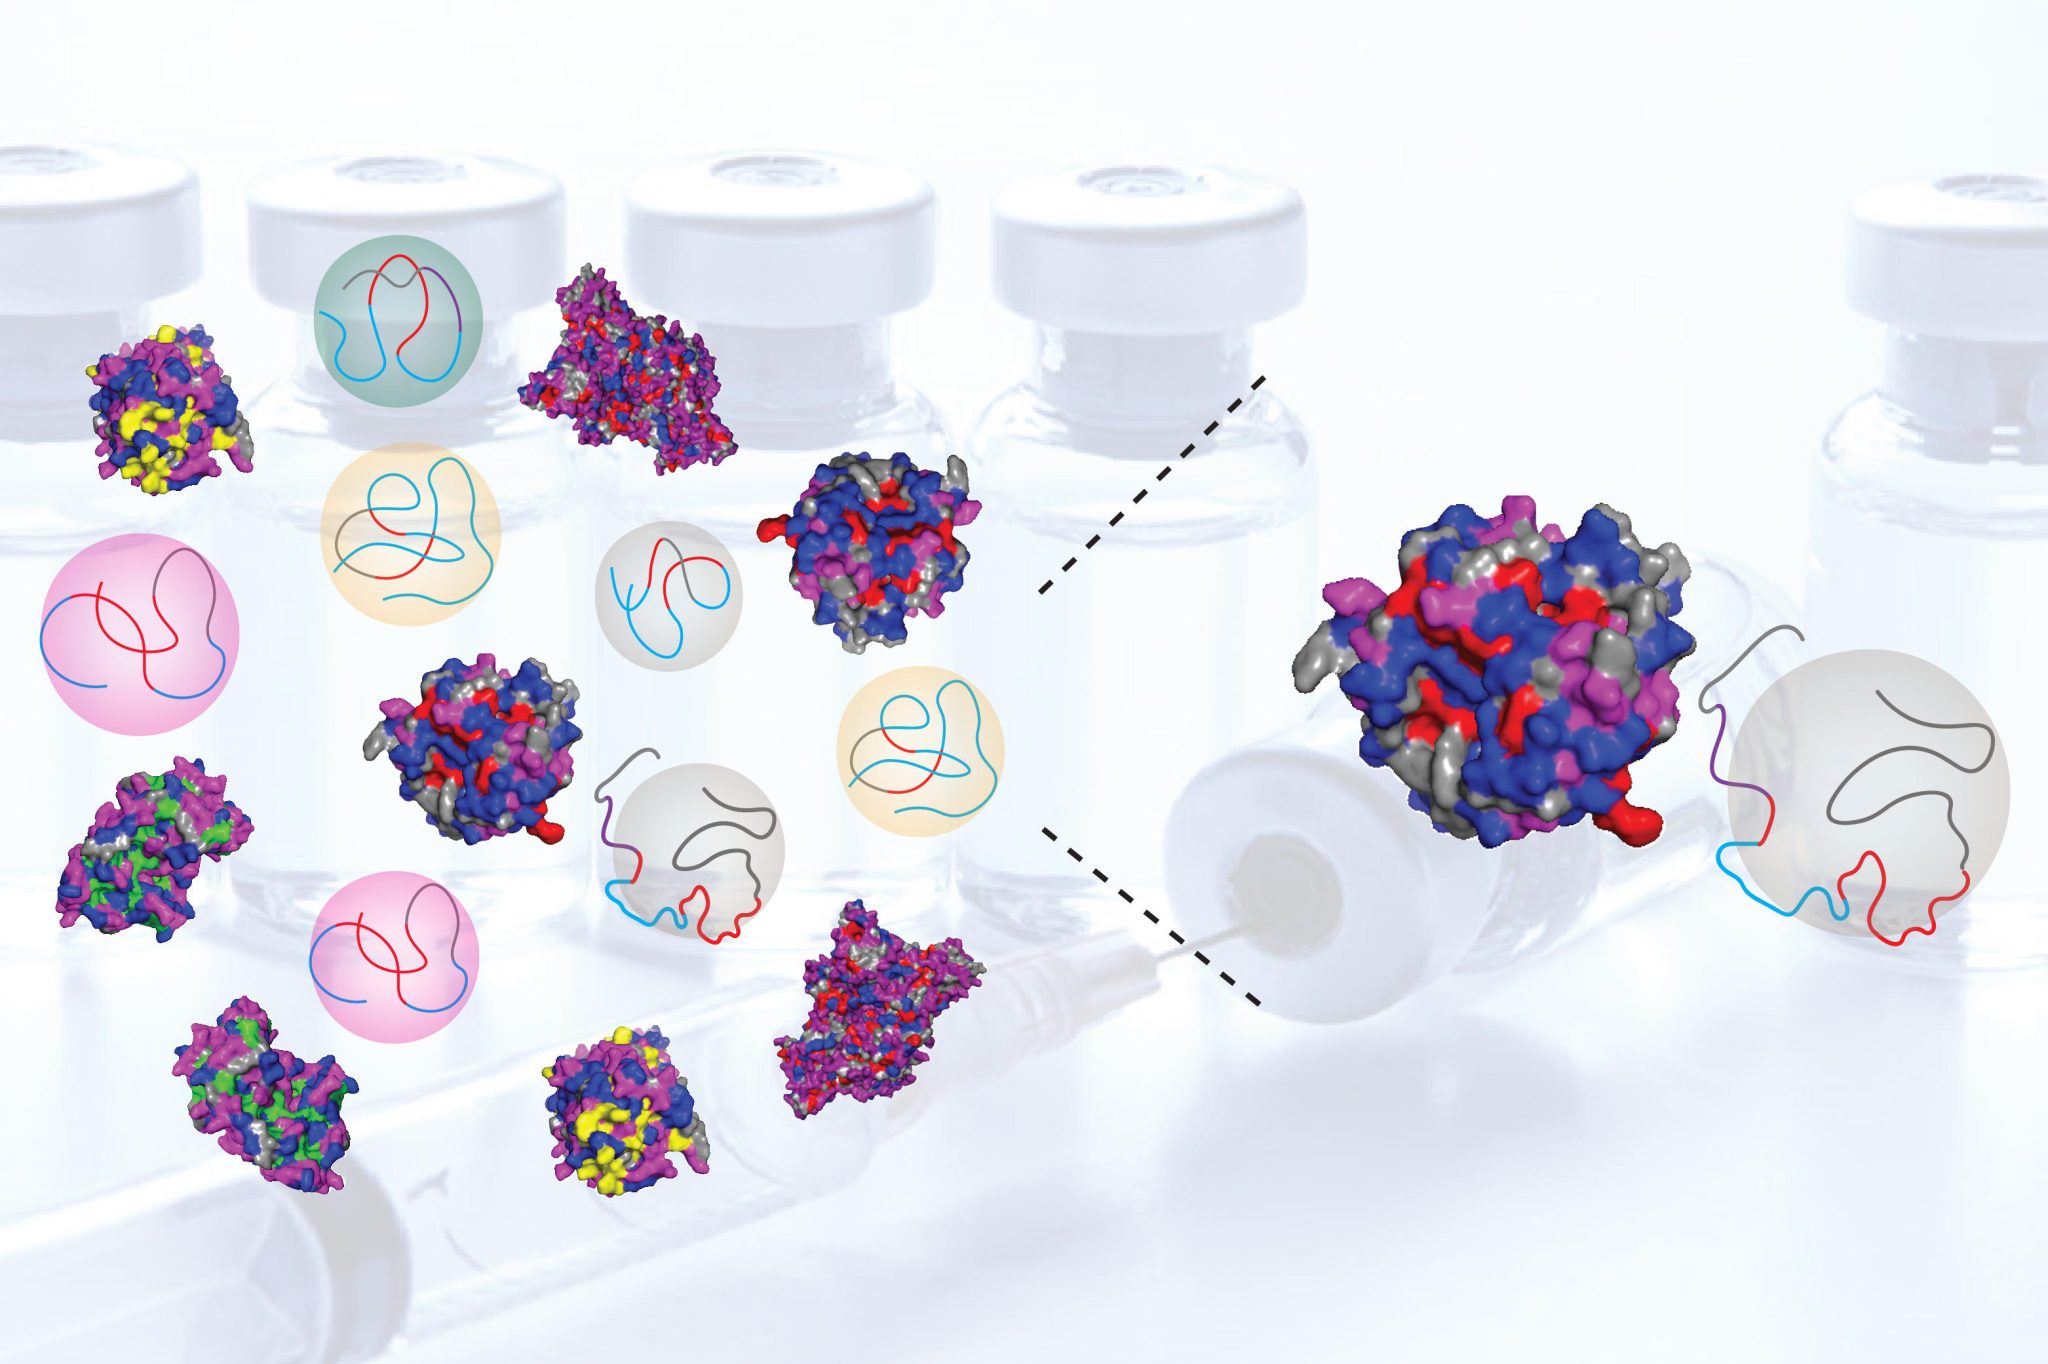 Can Synthetic Polymers Replace the Body’s Natural Proteins?